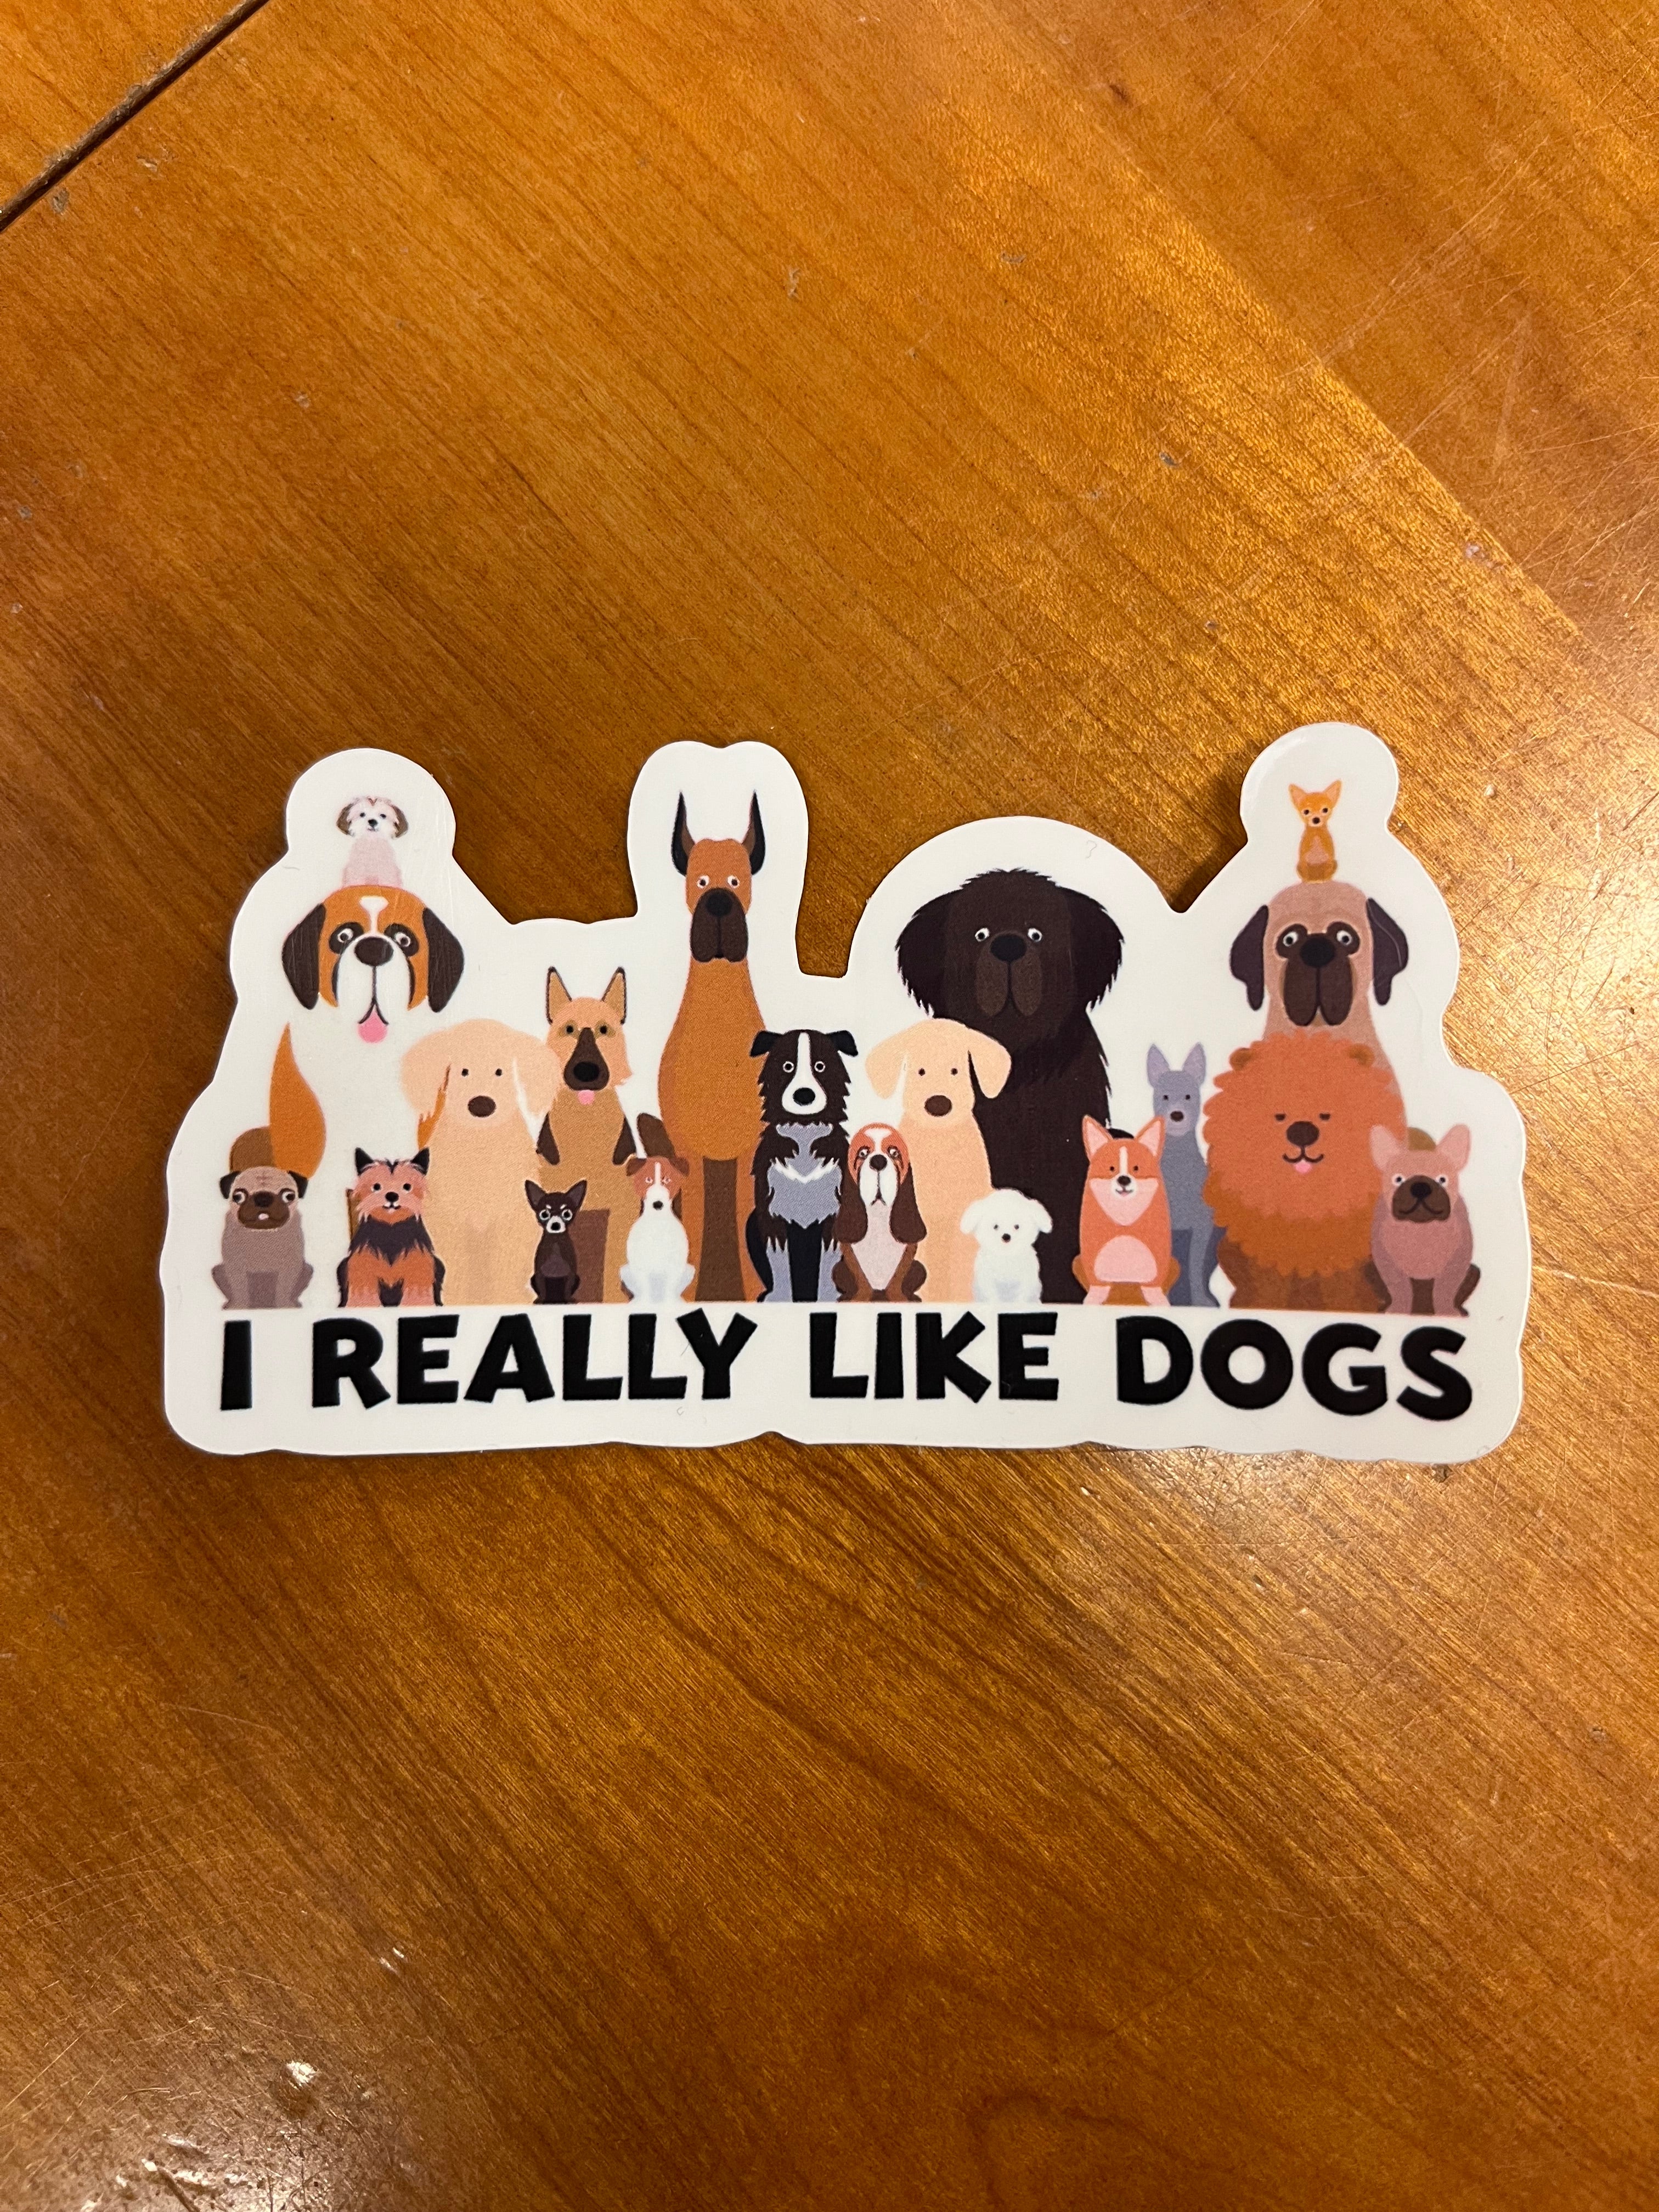 Stickers by Ace the Pitmatian